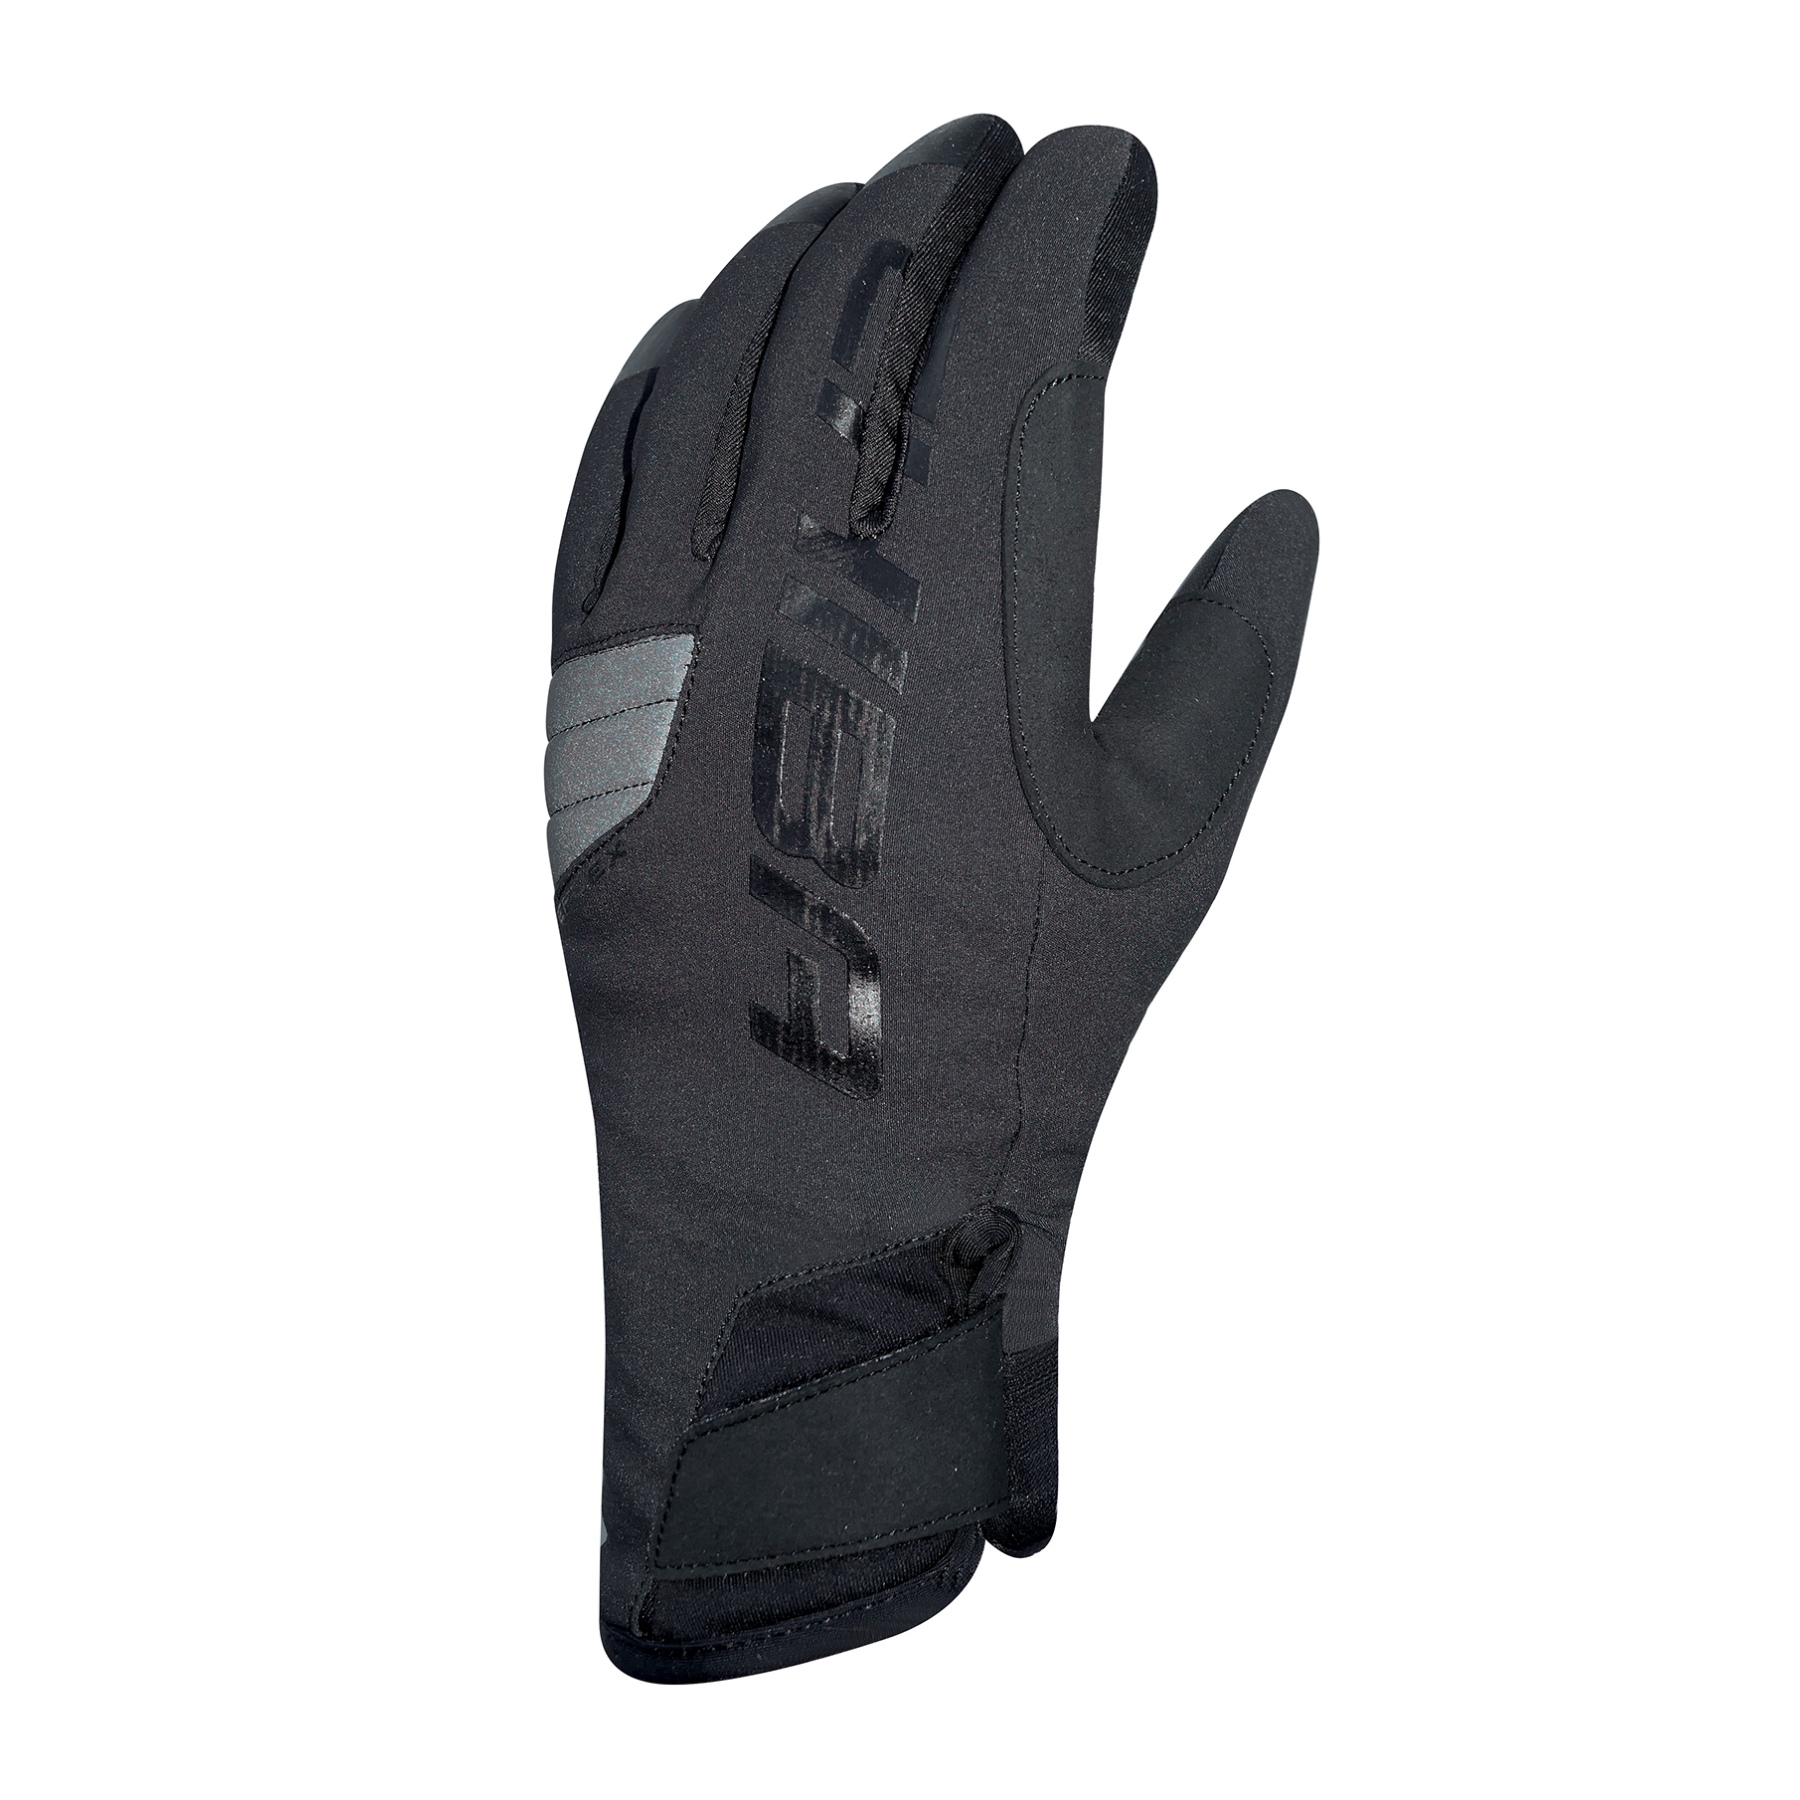 Picture of Chiba BioXCell Warm Winter Cycling Gloves - black 3160020